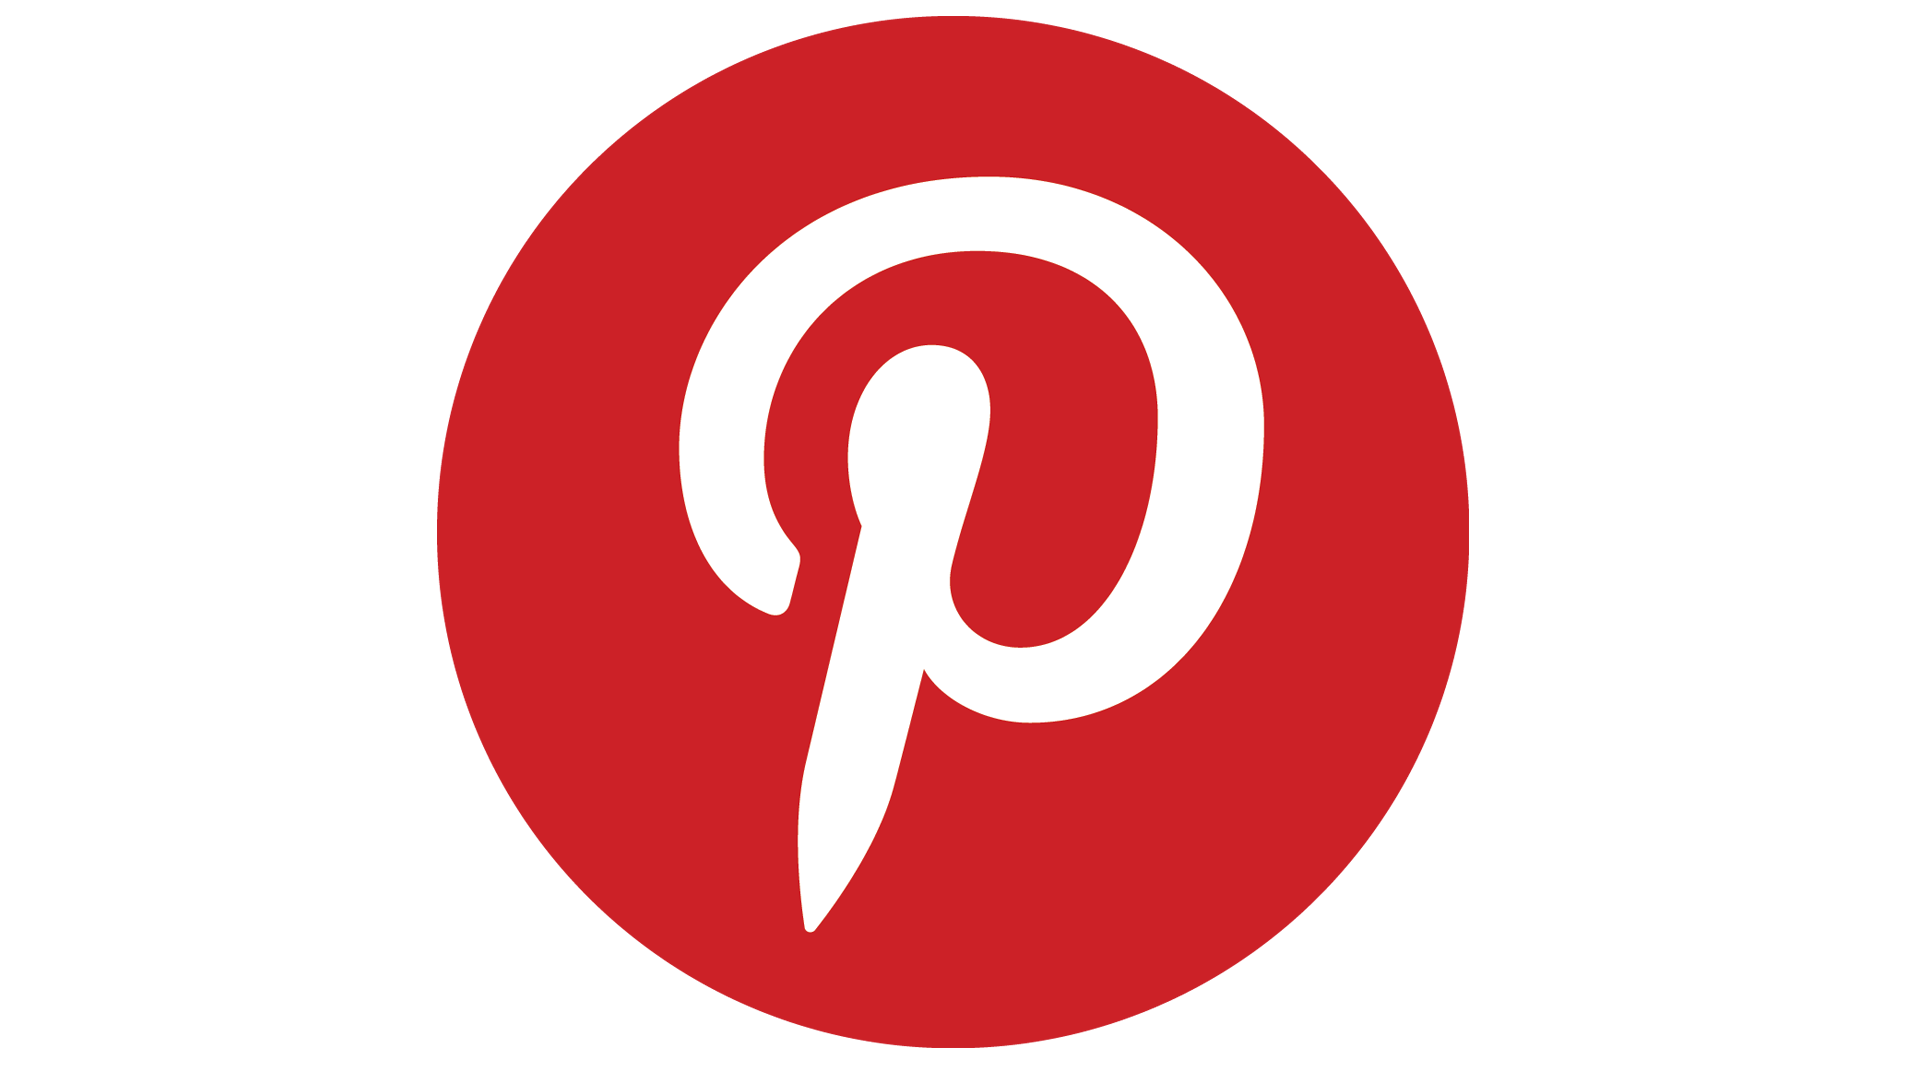 Pinterest Logo - Pinterest Logo, Pinterest Symbol, Meaning, History and Evolution